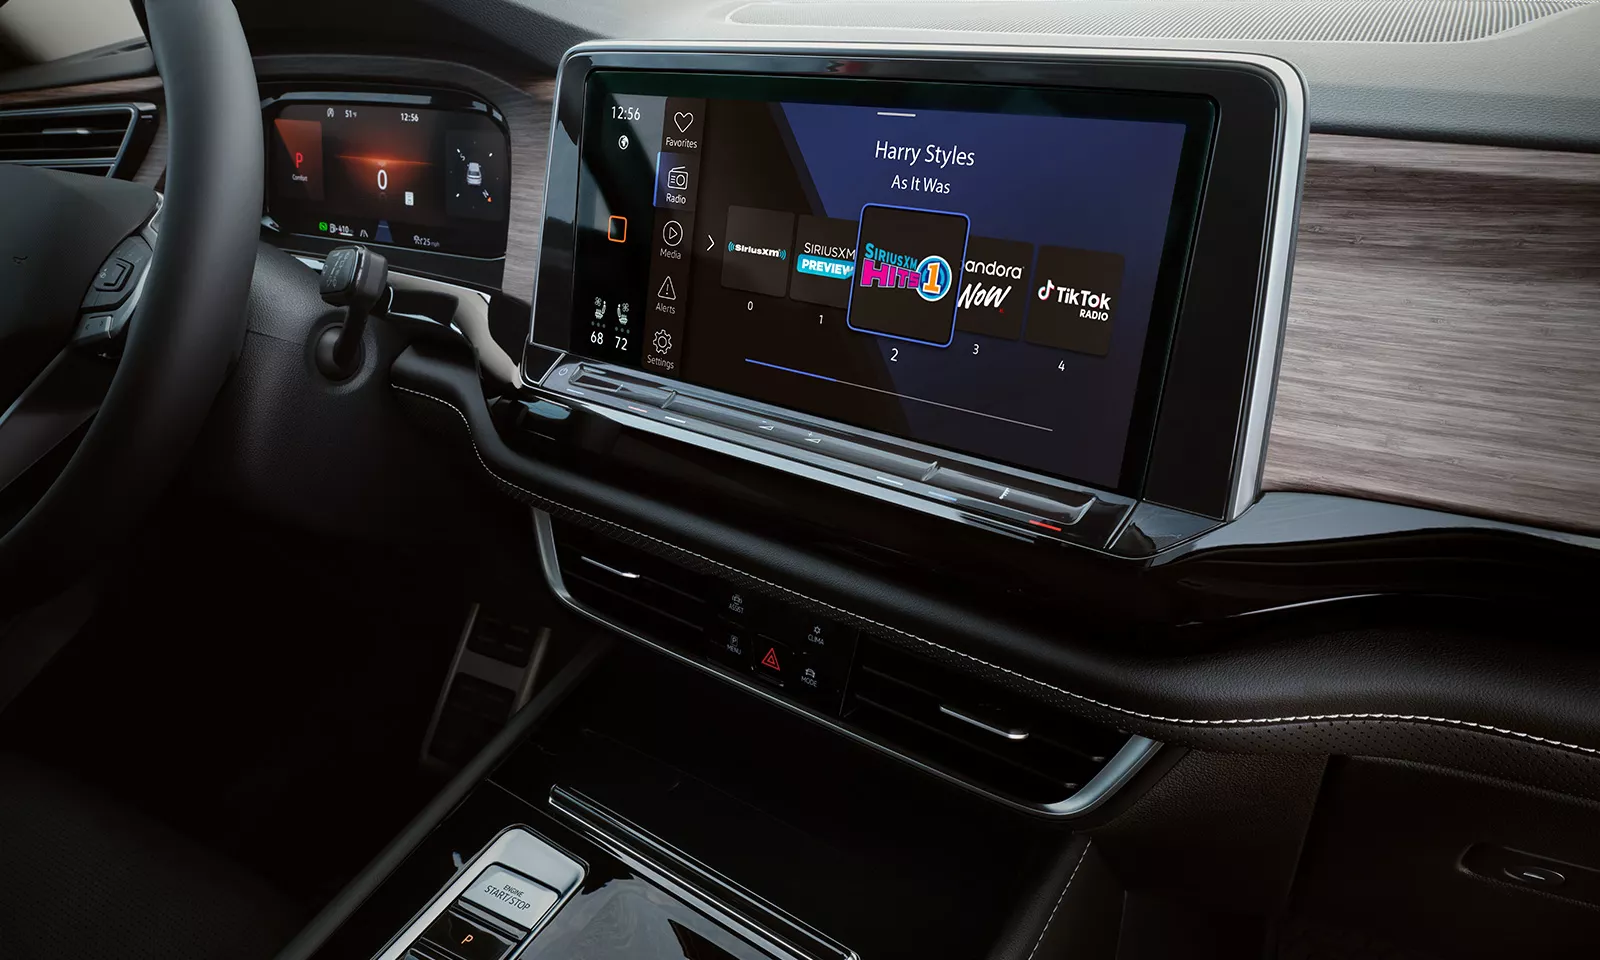 2024 VW Atlas Sirius XM showing available channels